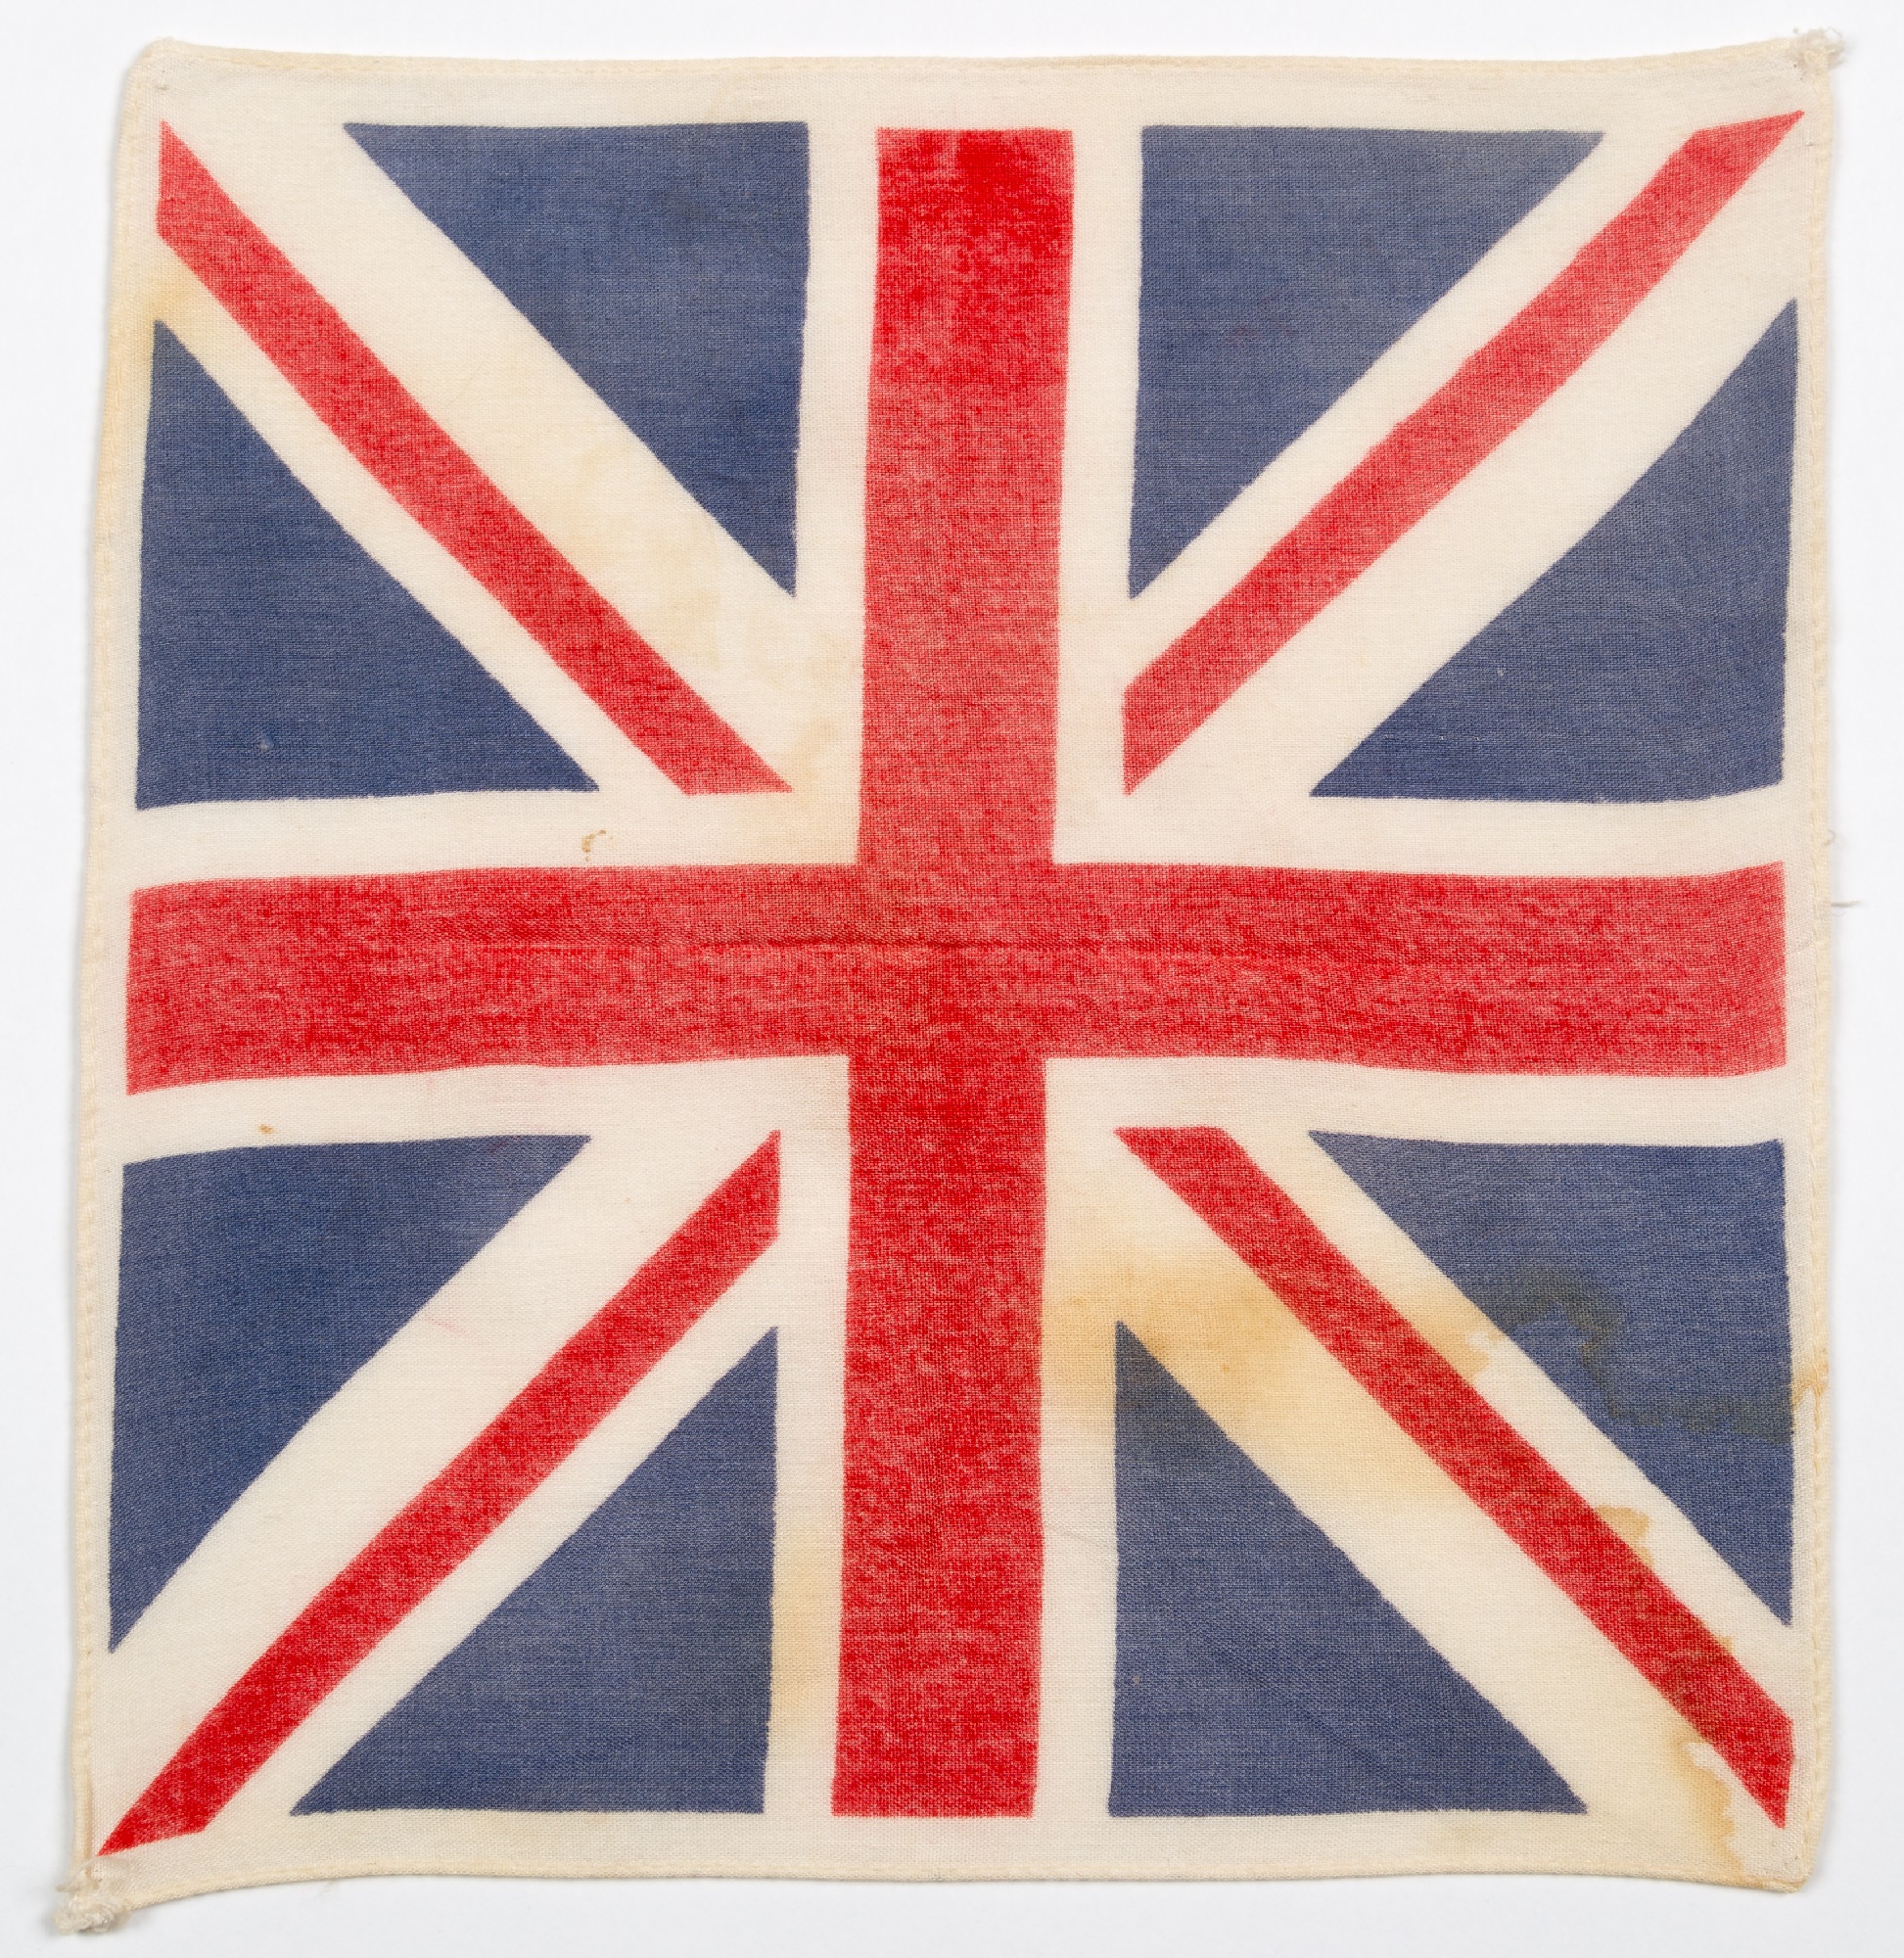 A Handkerchief with a Union Jack design